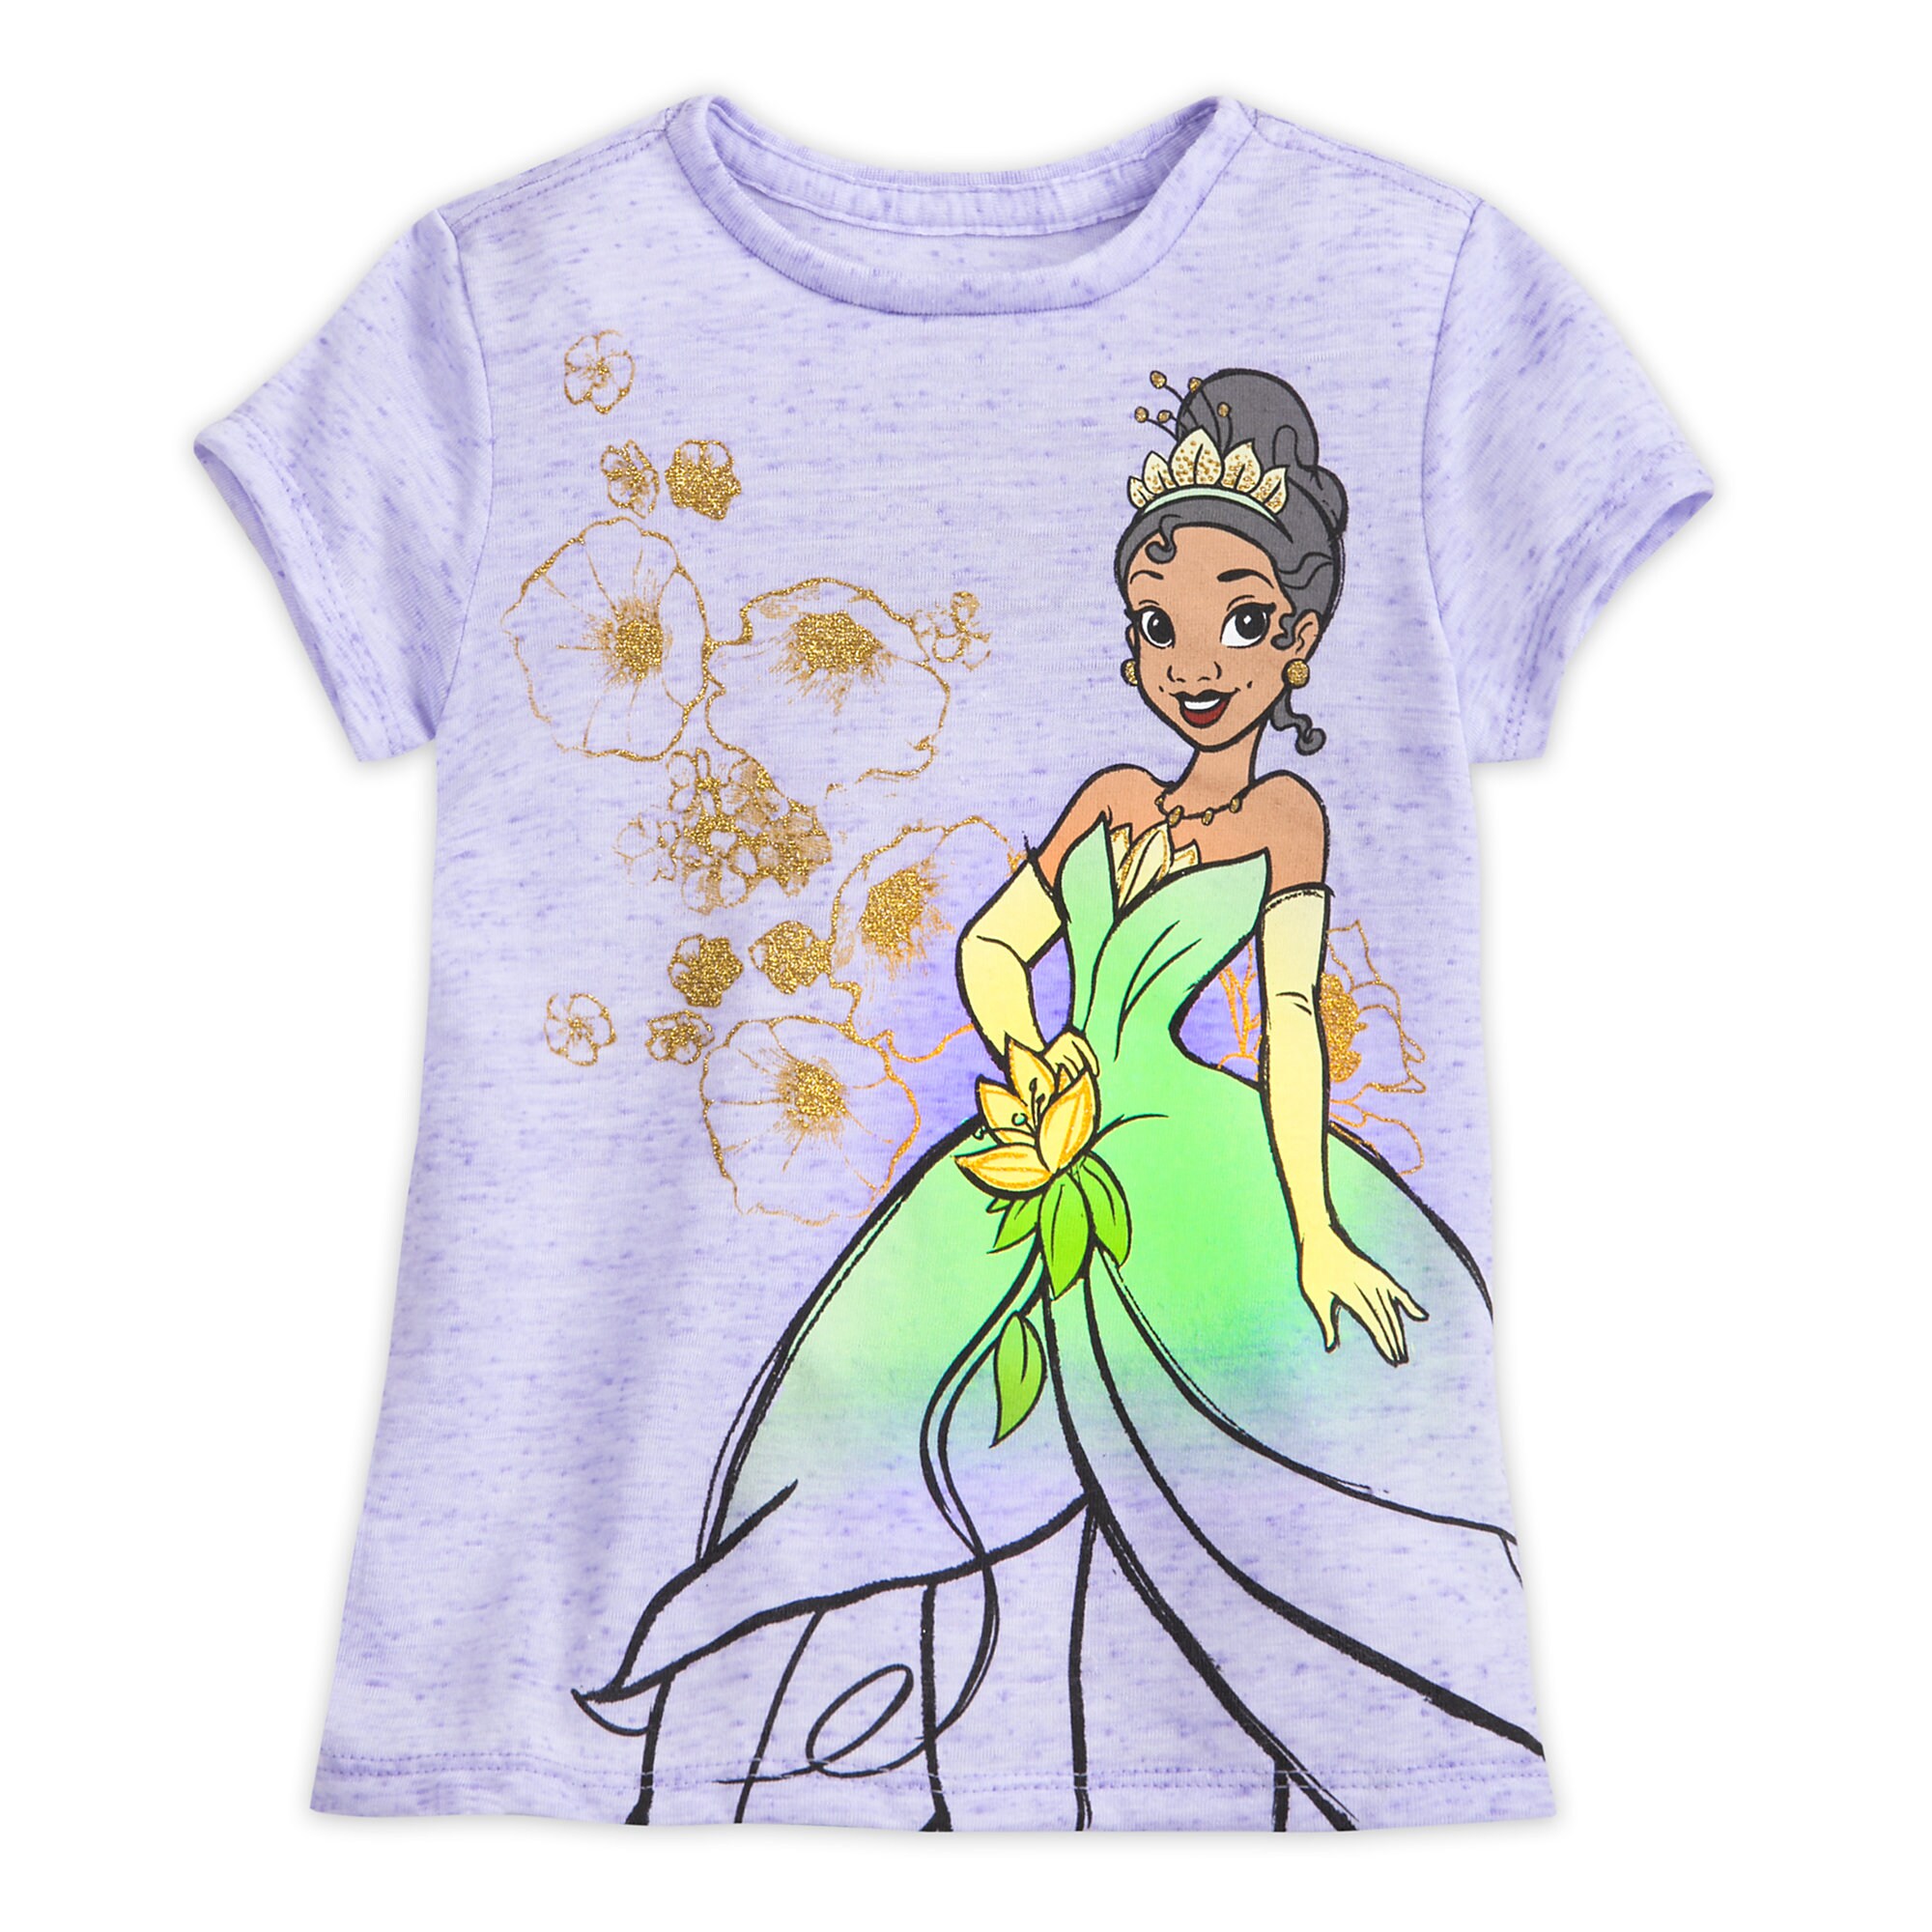 Tiana T-Shirt for Girls - The Princess and the Frog